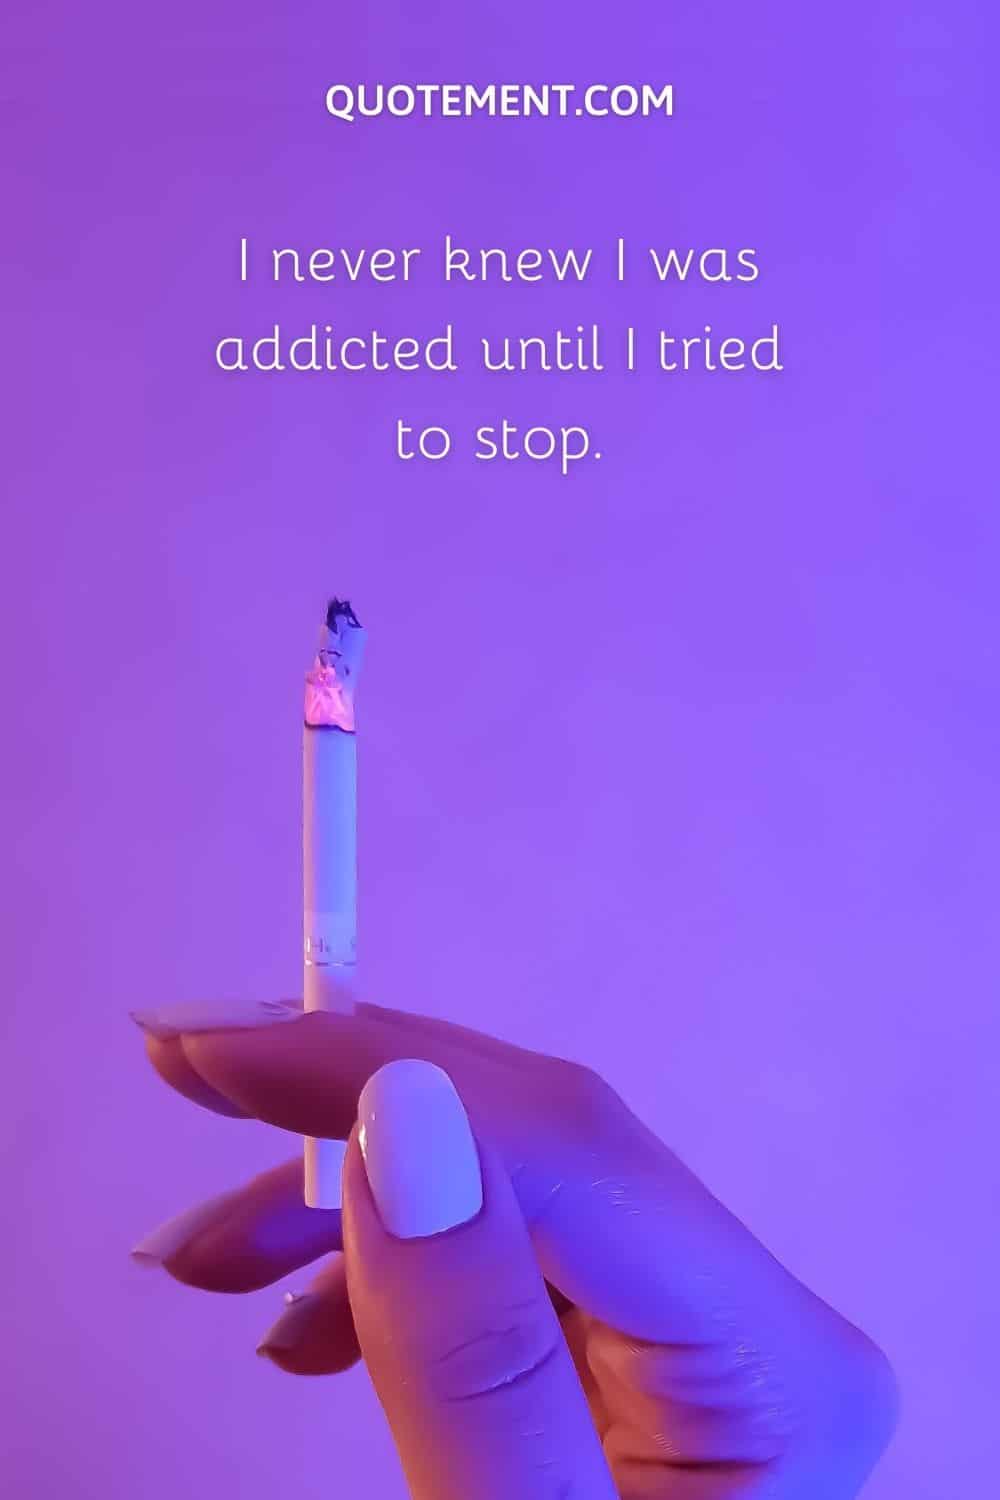 I never knew I was addicted until I tried to stop